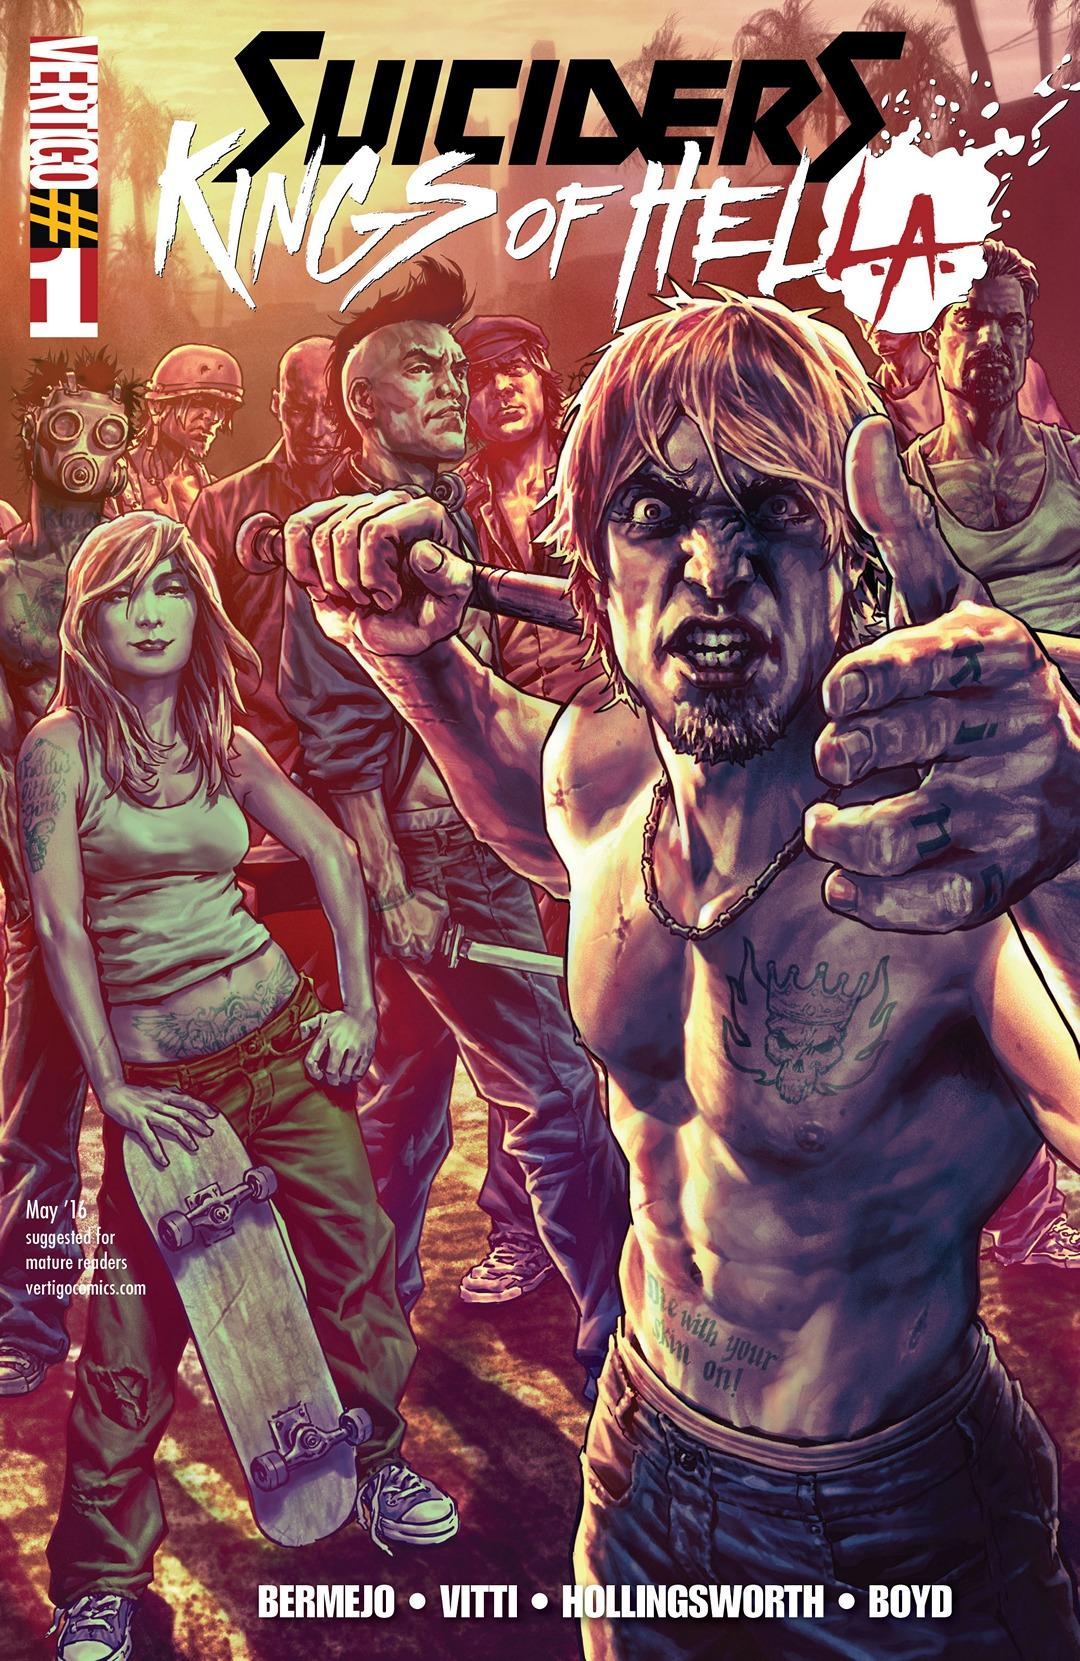 Suiciders: Kings of HELL.A. Vol. 1 #1